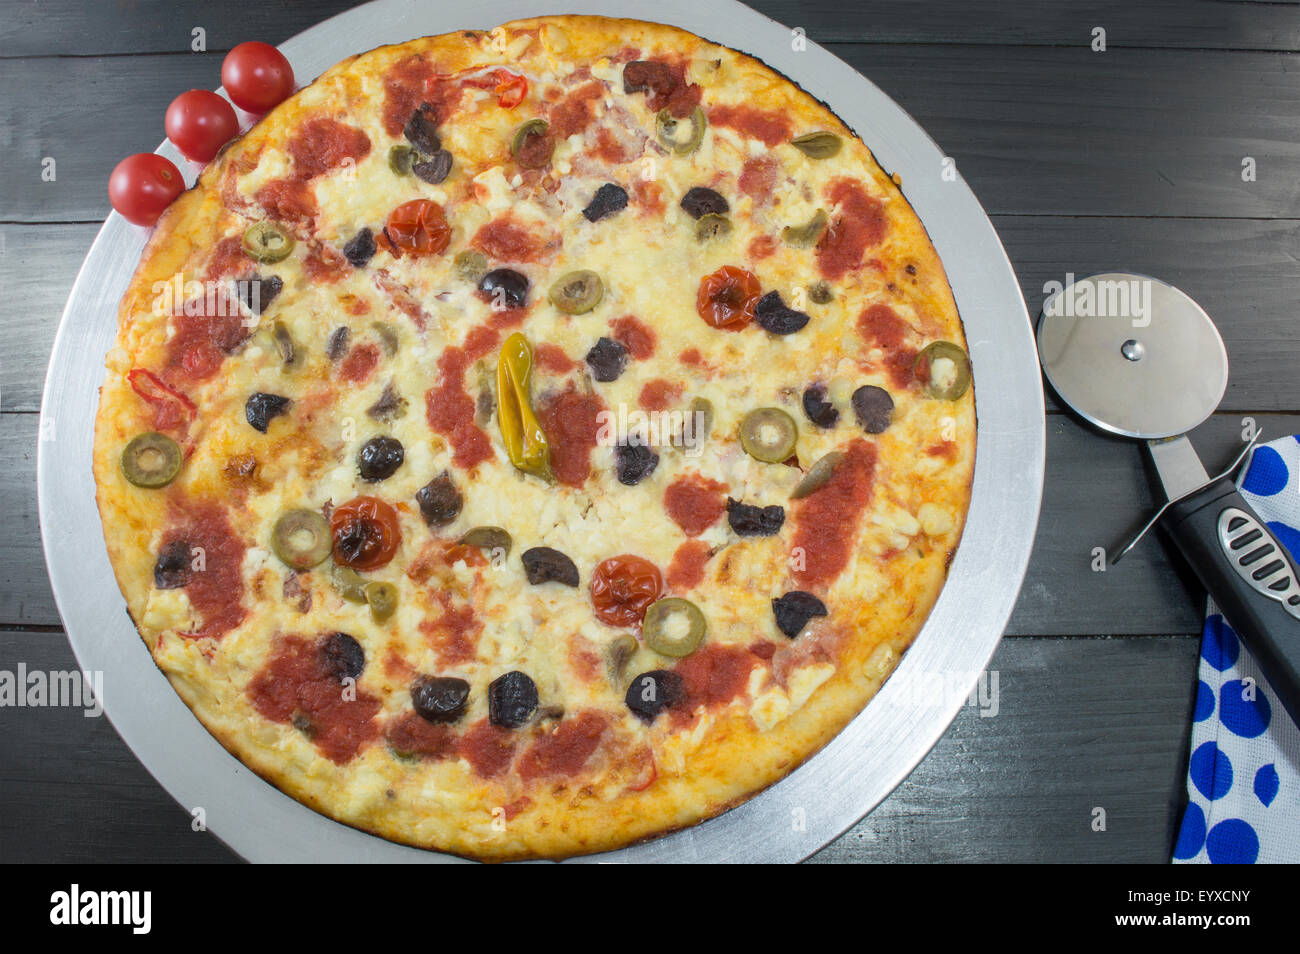 Whole vegetarian pizza with cherry tomato on dark table Stock Photo